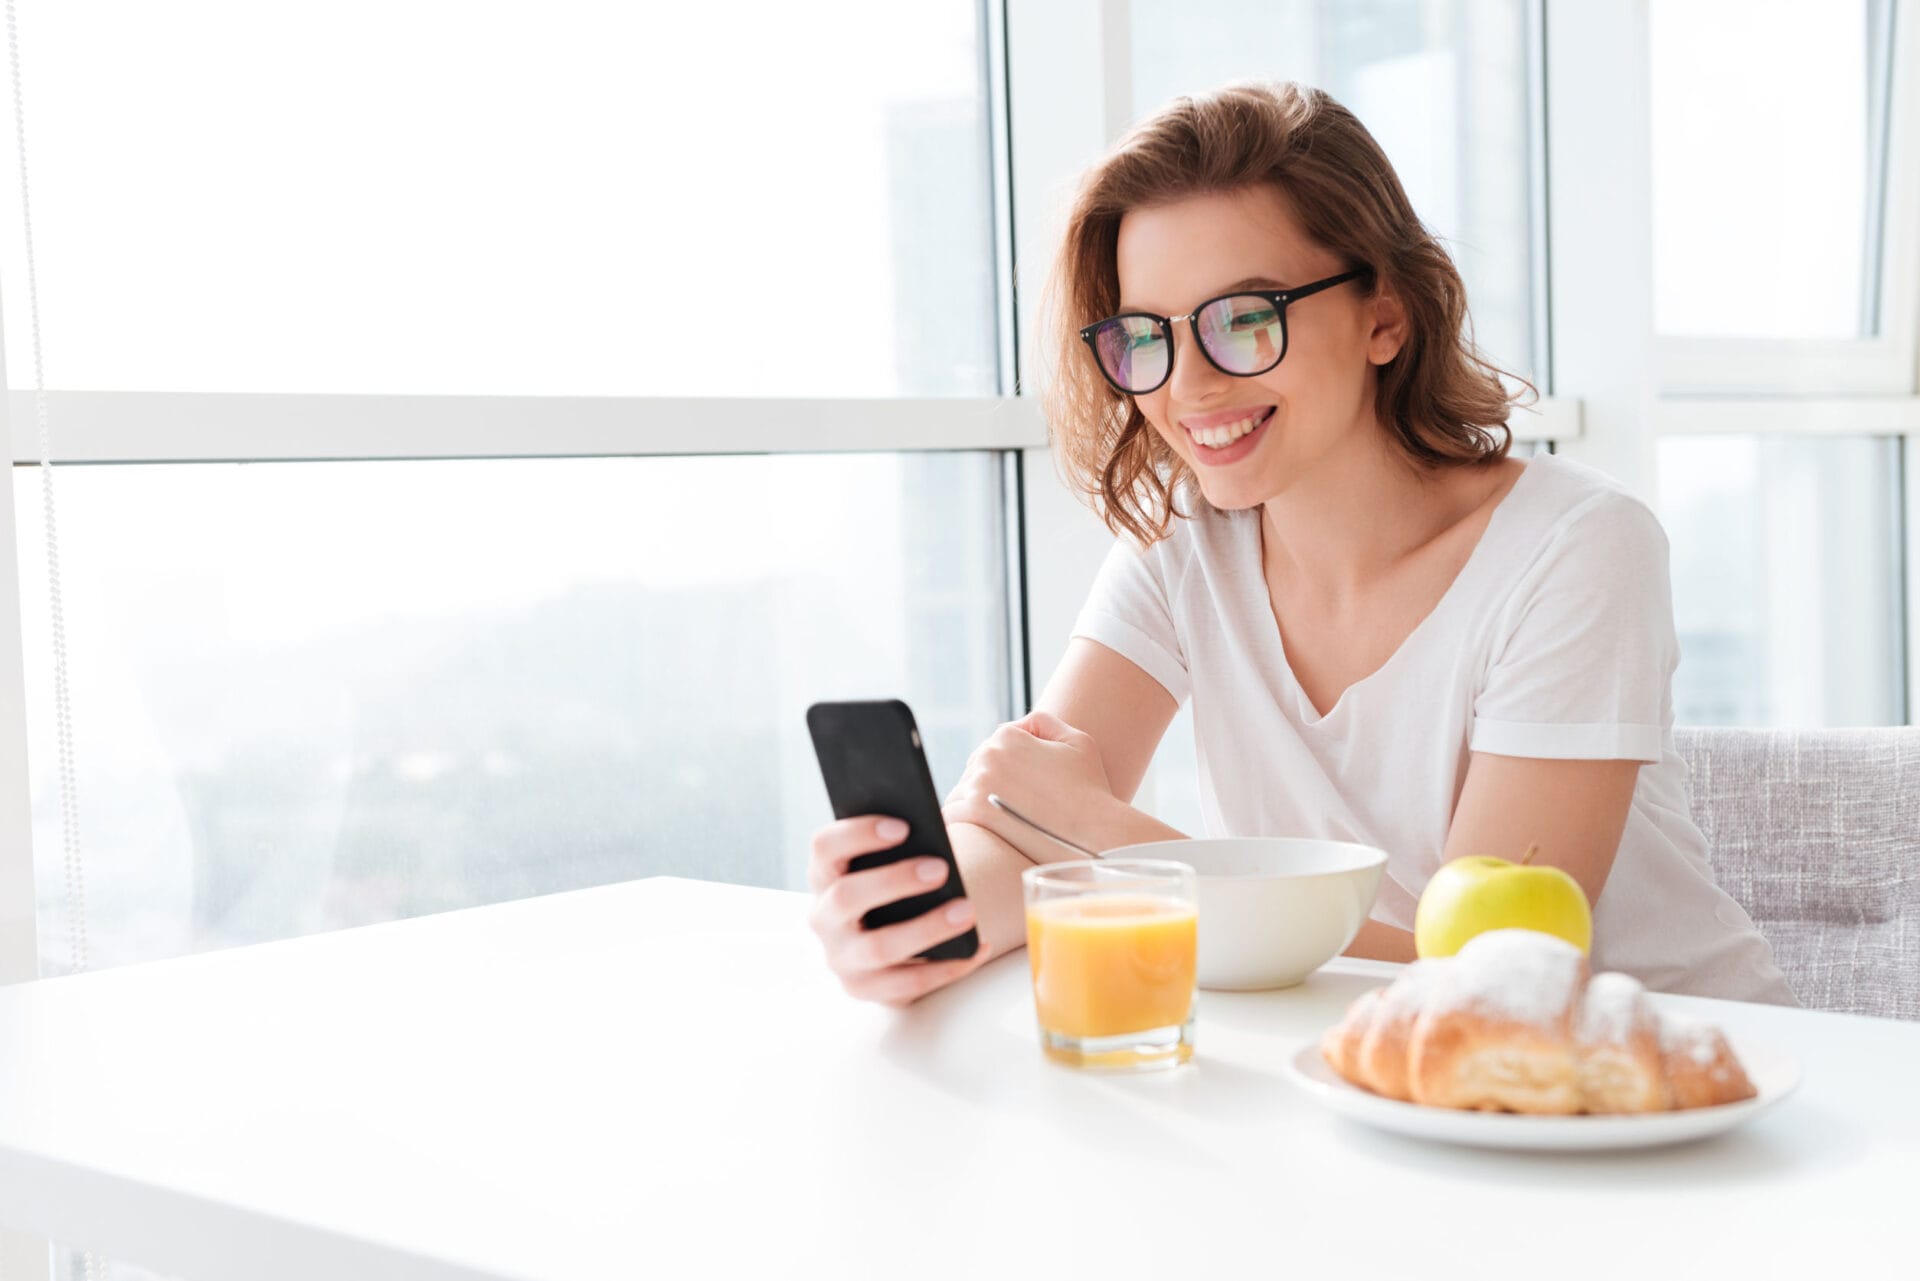 Photo of cheerful young amazing woman sitting indoors at the table with juice and croissant and corn flakes. Looking aside chatting by mobile phone.